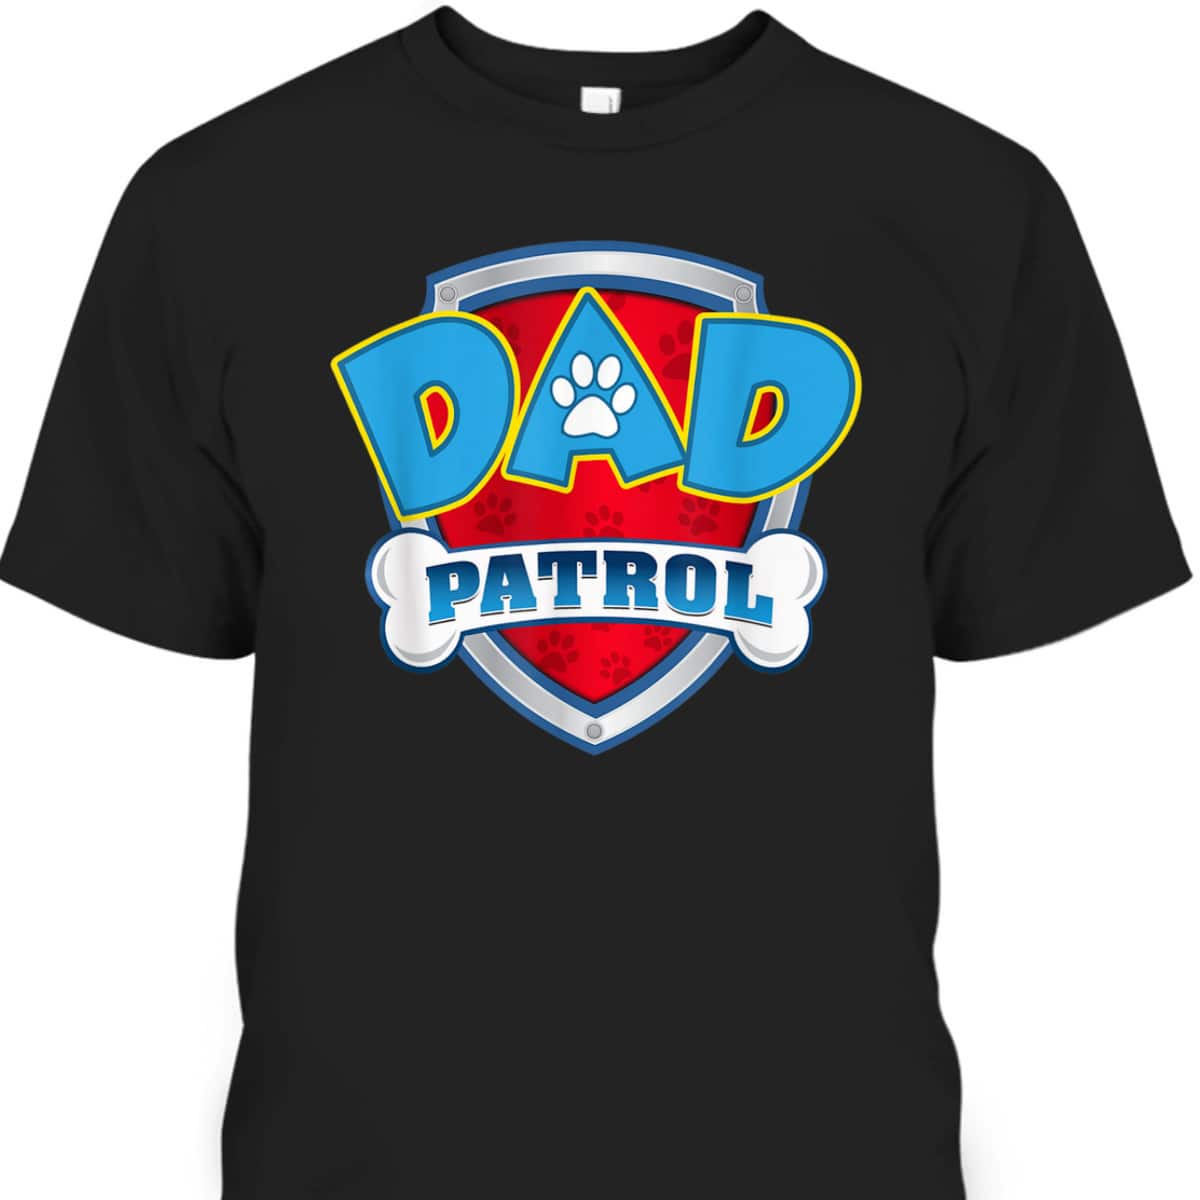 Father's Day T-Shirt Dad Patrol Gift For Dog Lovers